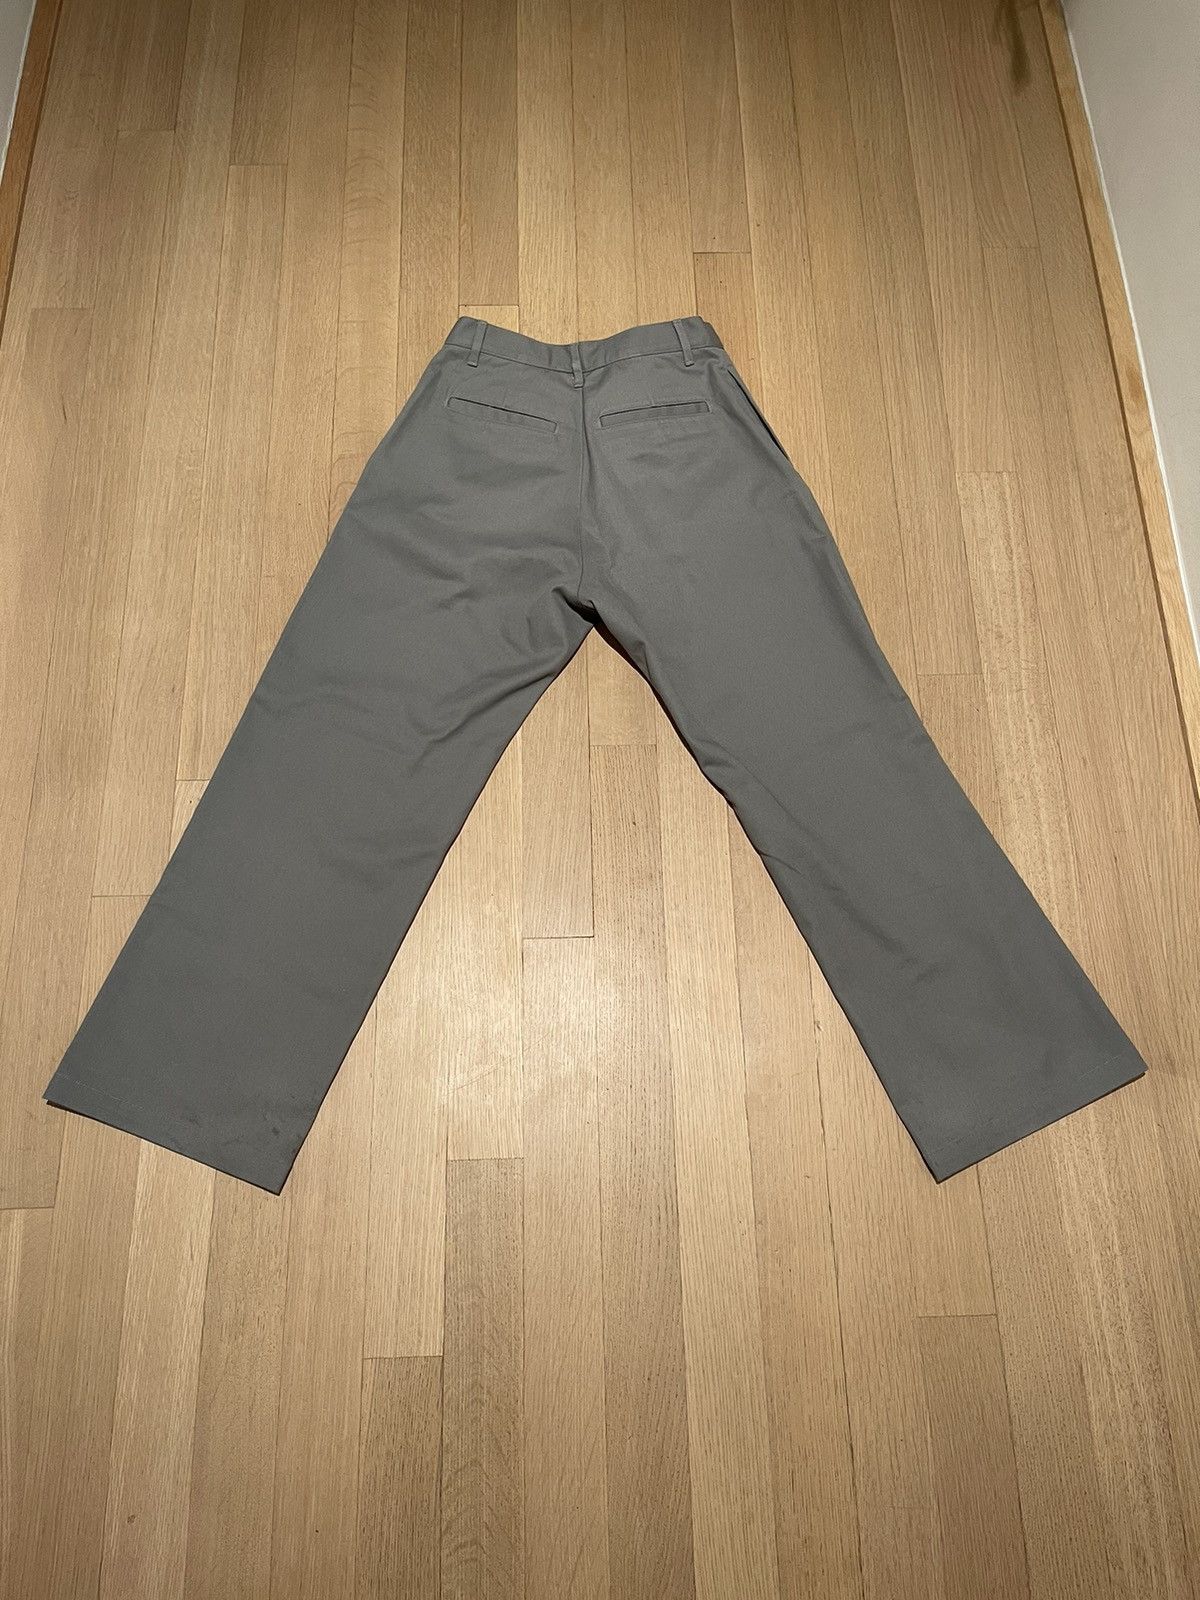 Noon Goons NOON GOONS CLUB STRAIGHT-LEG TROUSER Size US 30 / EU 46 - 2 Preview